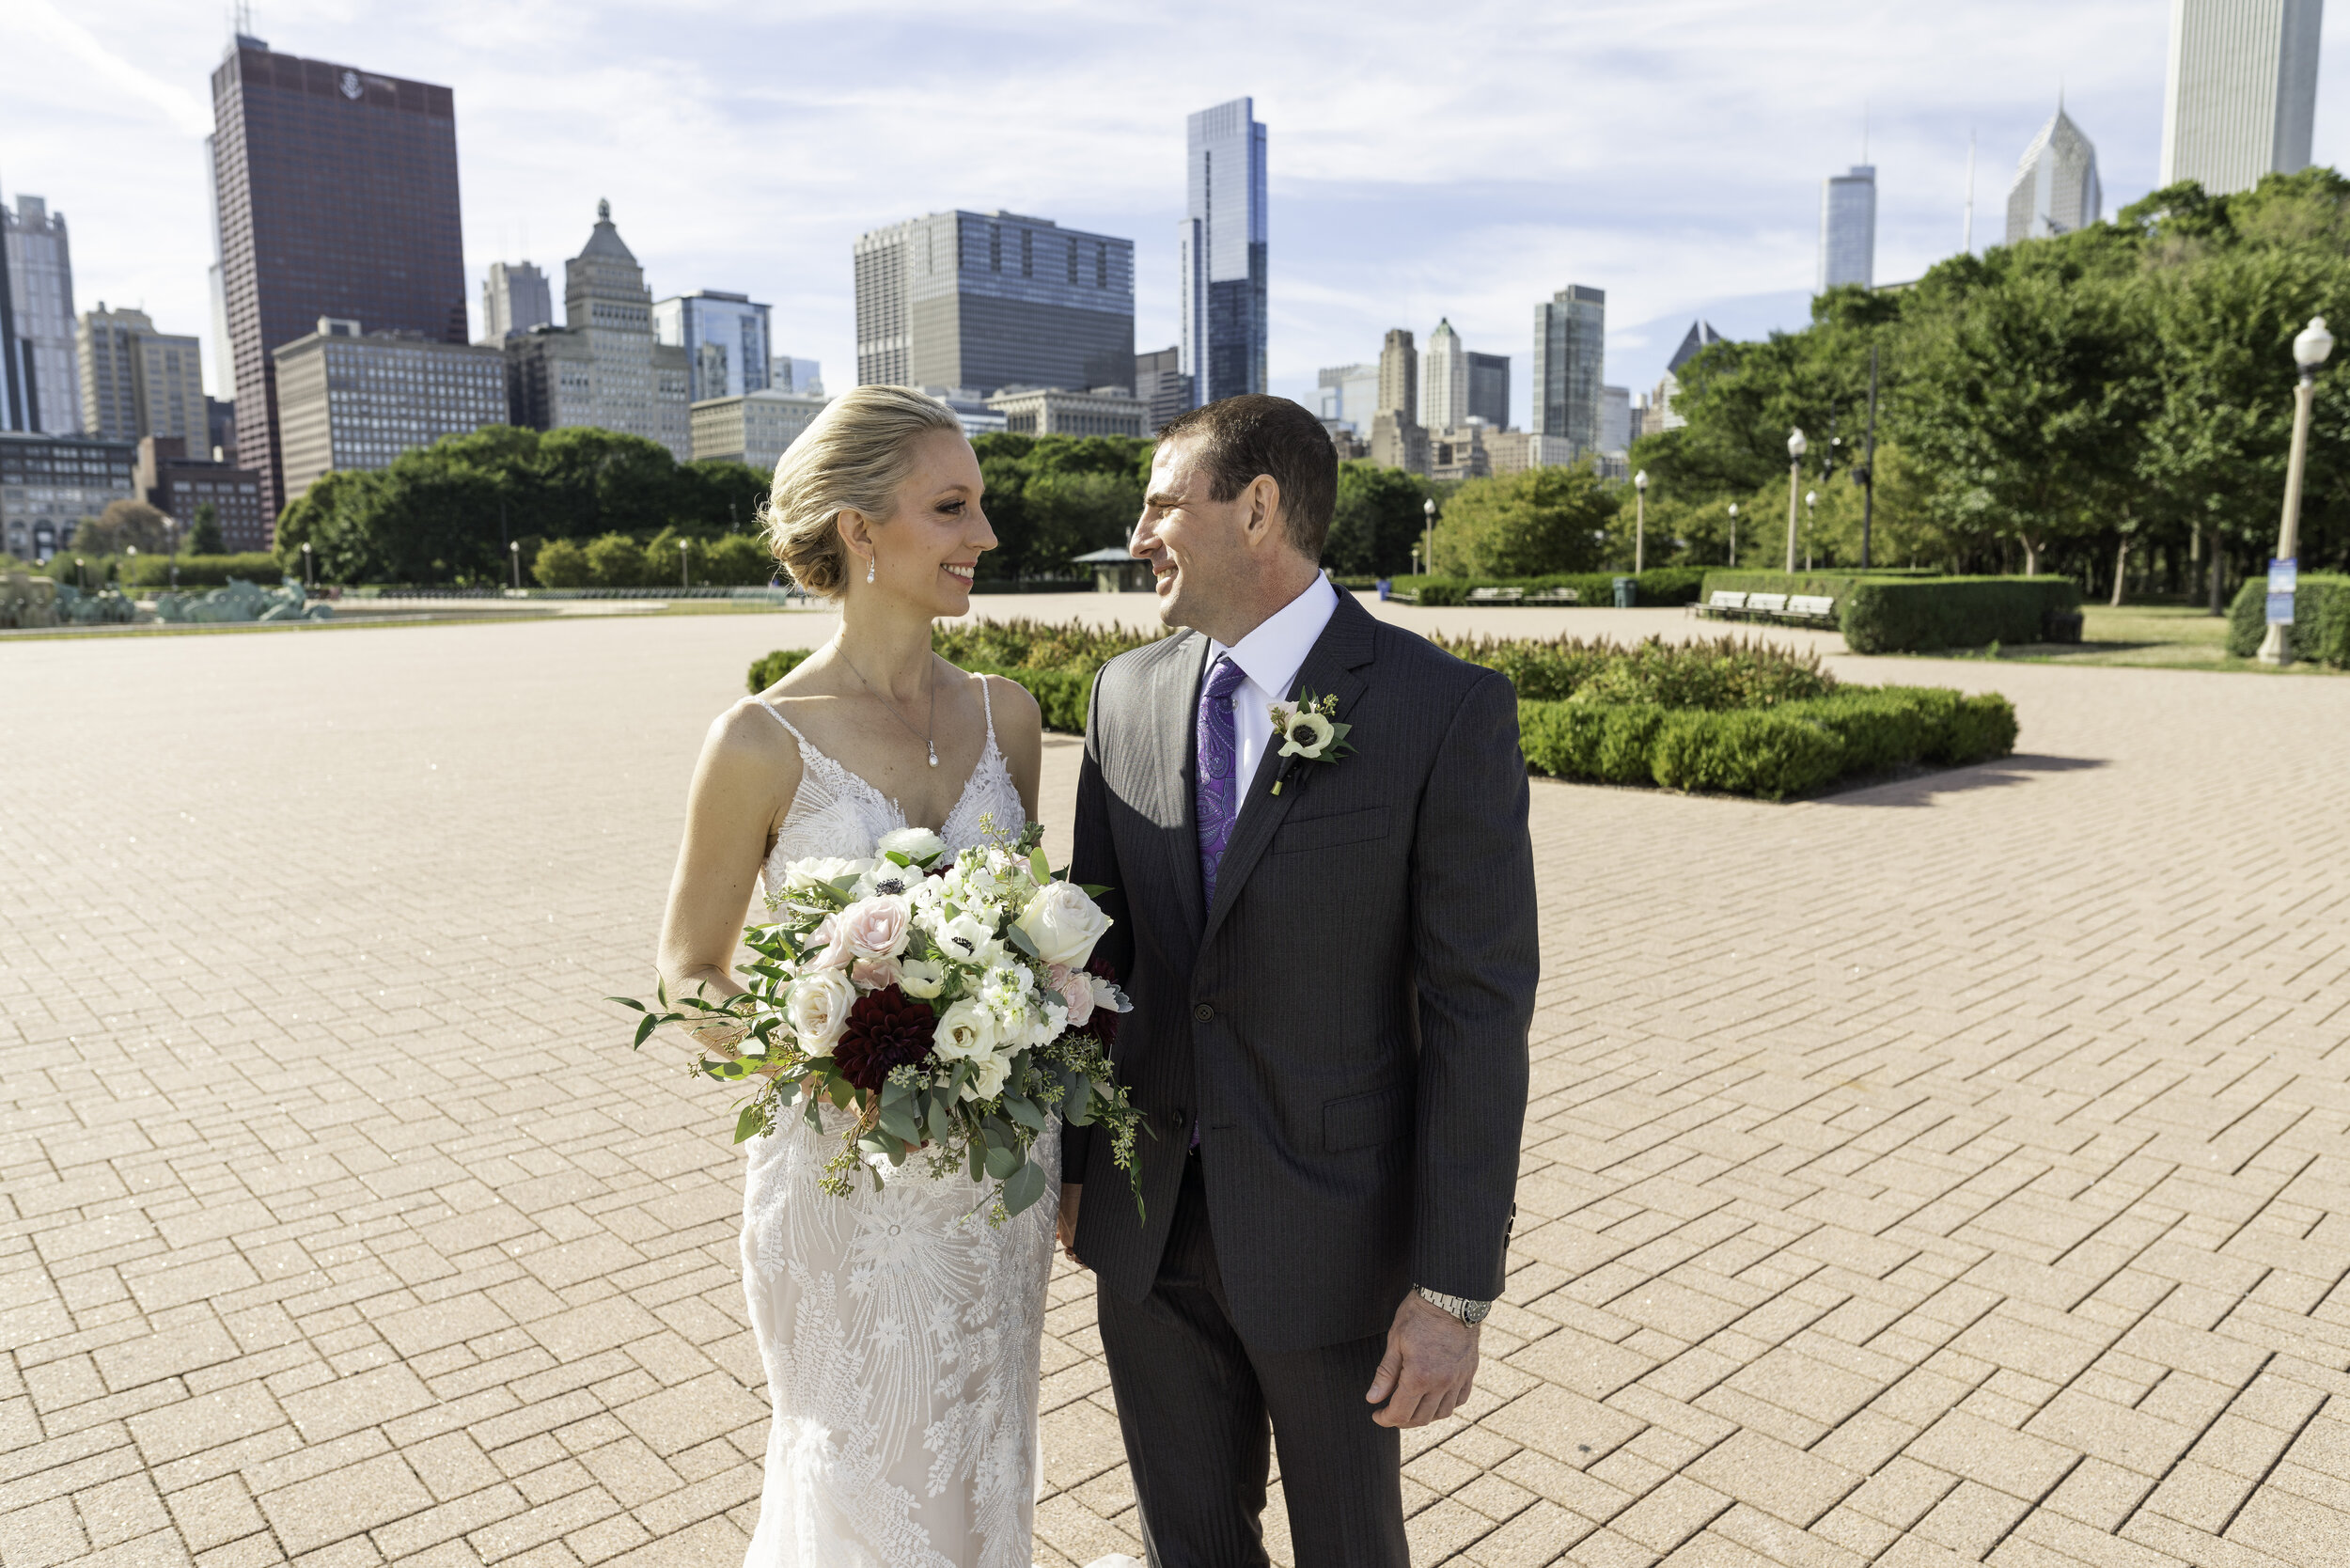 Sweet Summer Wedding Celebration in the City captured by Adam Novak | CHI thee WED